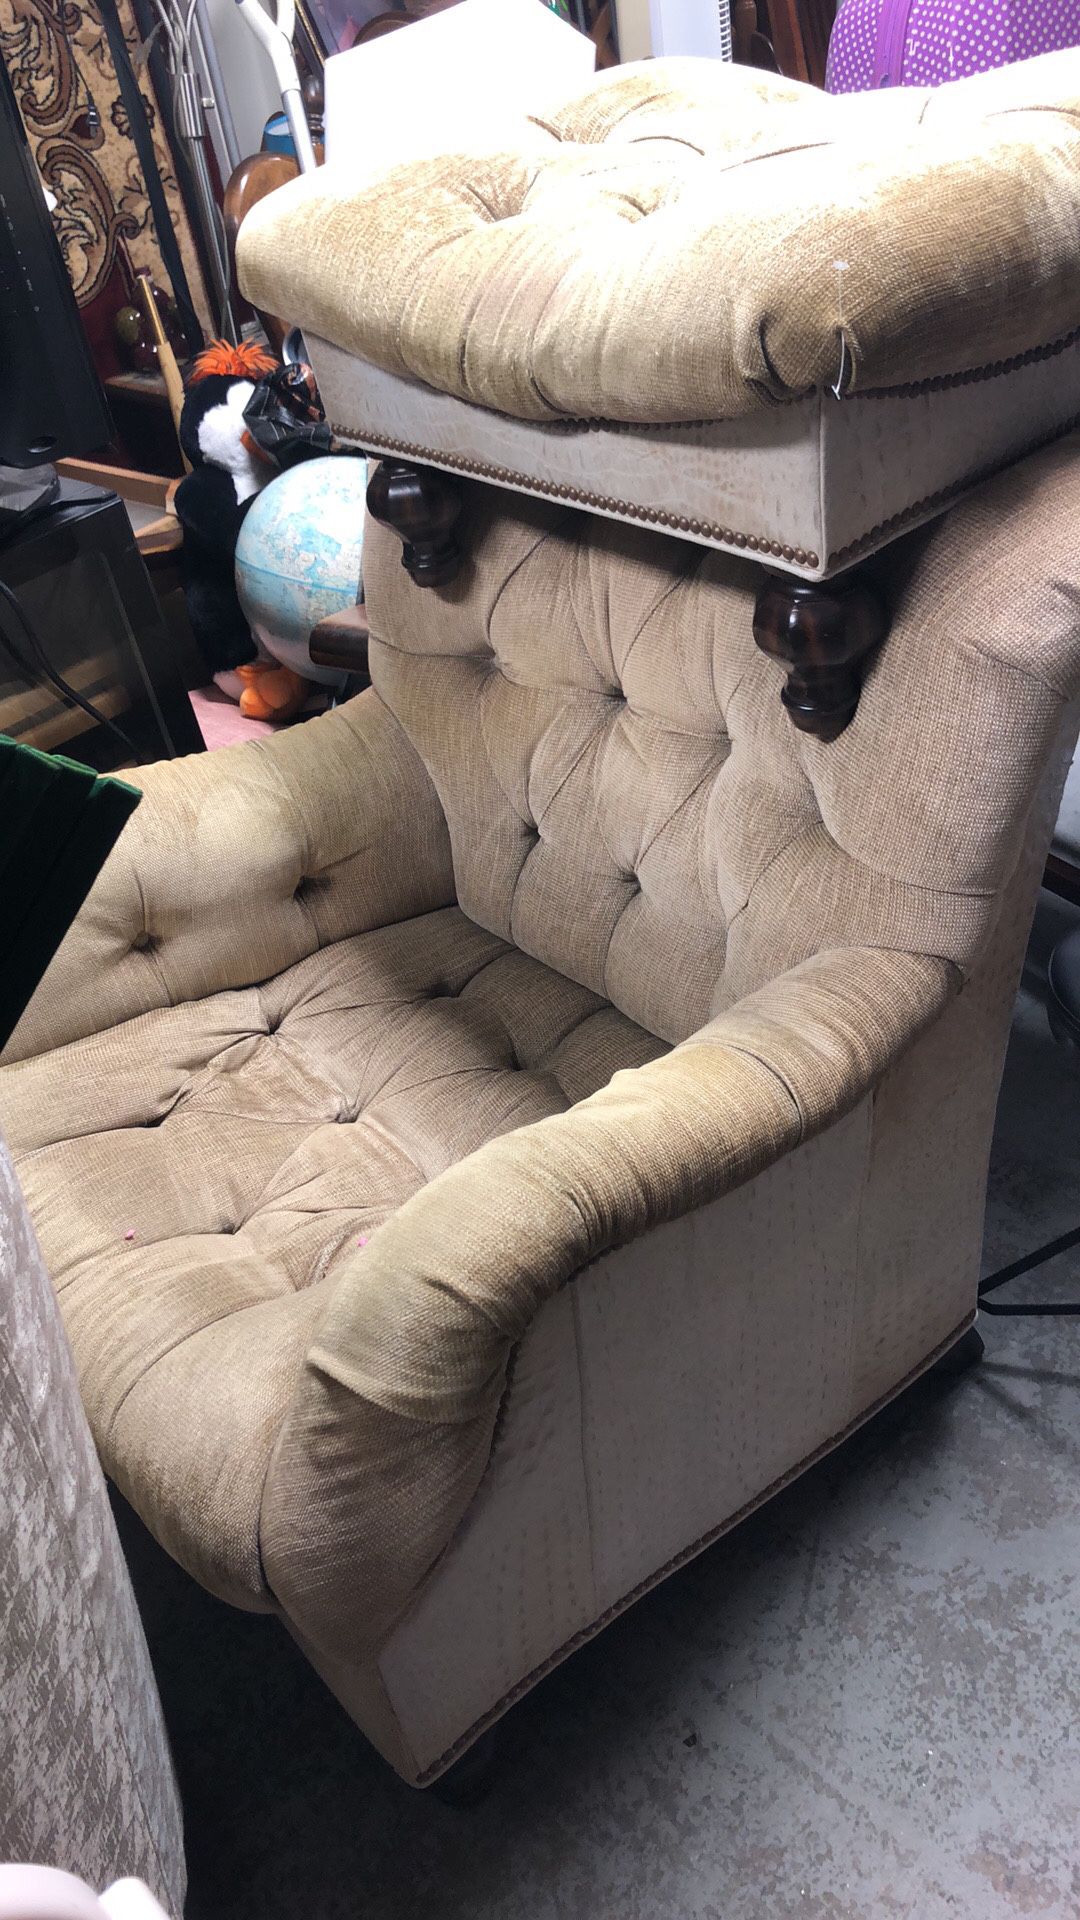 Super comfortable living room chair with ottoman